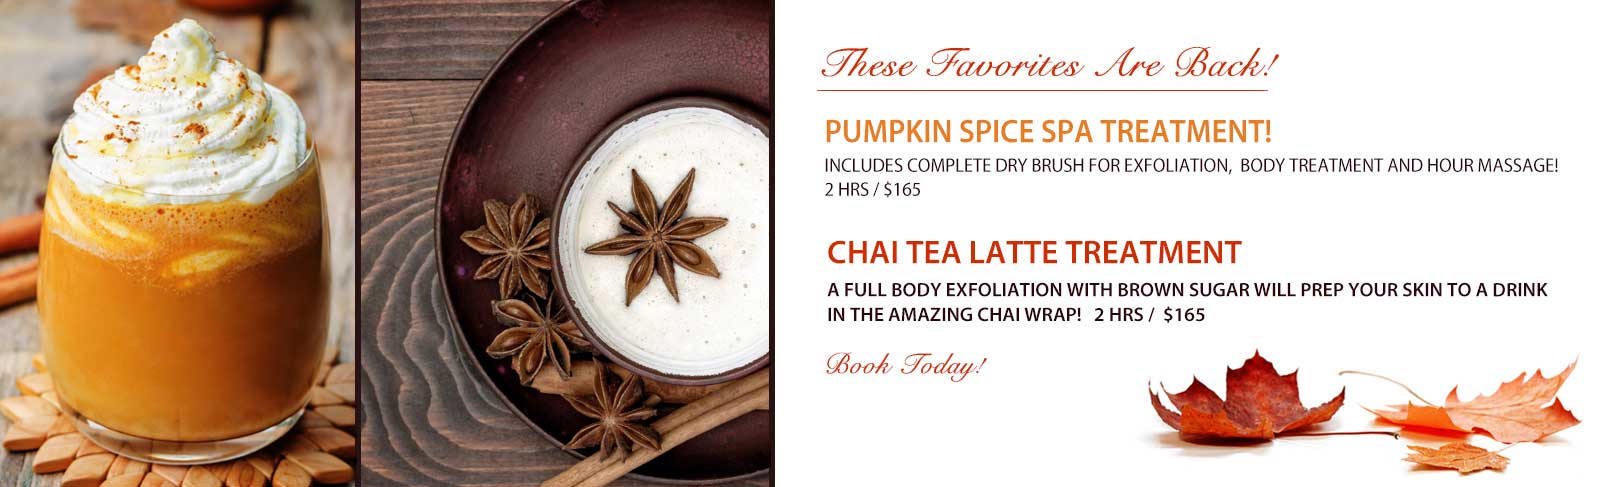 Pacific Tranquility Massage Chia Tea Latte and Pumpkin Spice Spa Treatment. Schedule Your Relaxation Body Treatments Today! Exclusively at Pacific Tranquility Massage in Bremerton WA